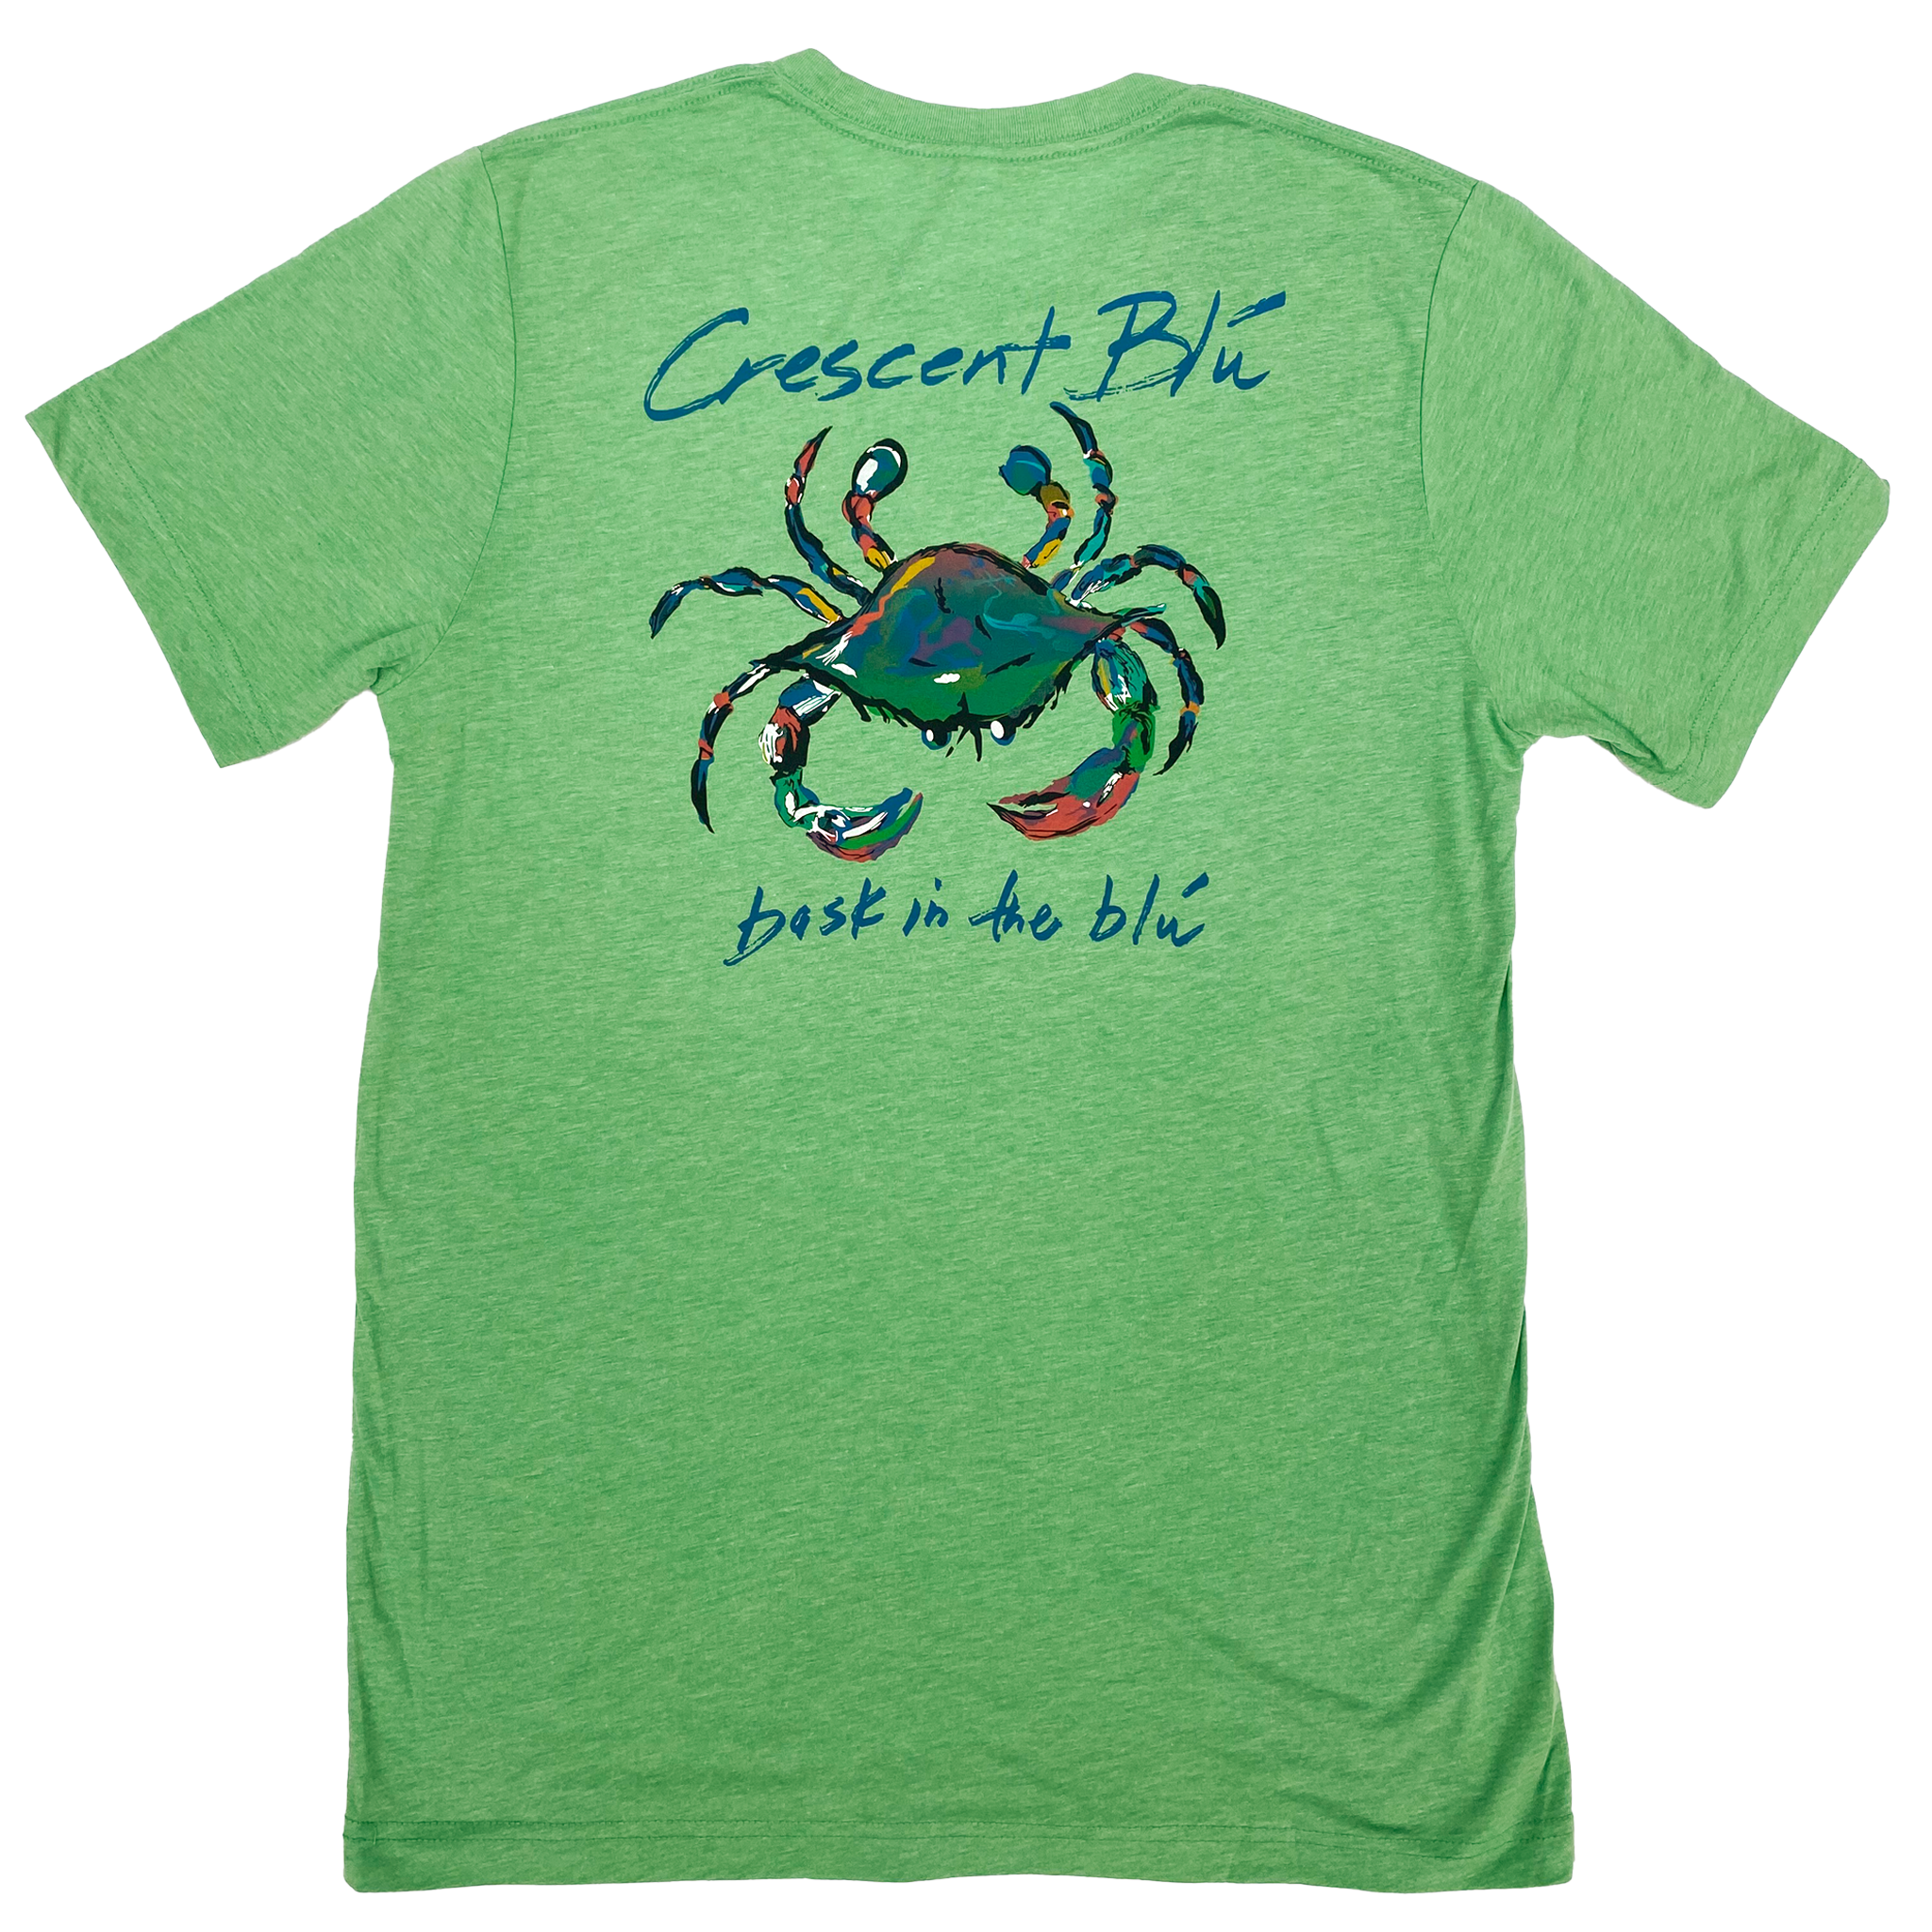 Adult short sleeve t-shirt with large multi-colored crab logo printed . Shirt is green in color